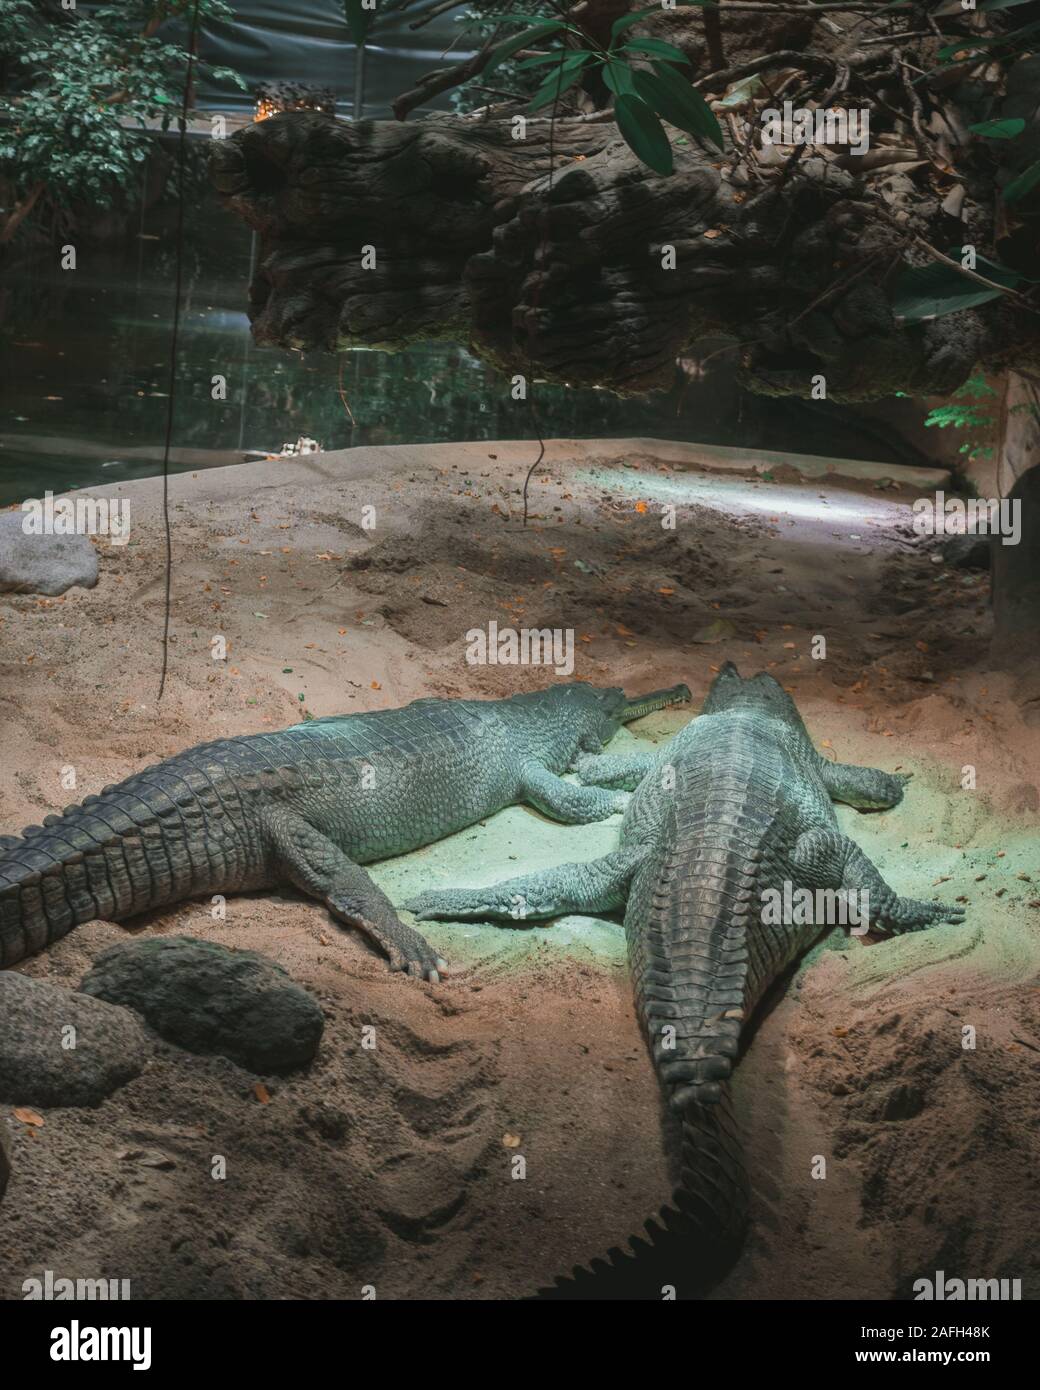 Vertical shot of alligators hanging out in an aquarium Stock Photo